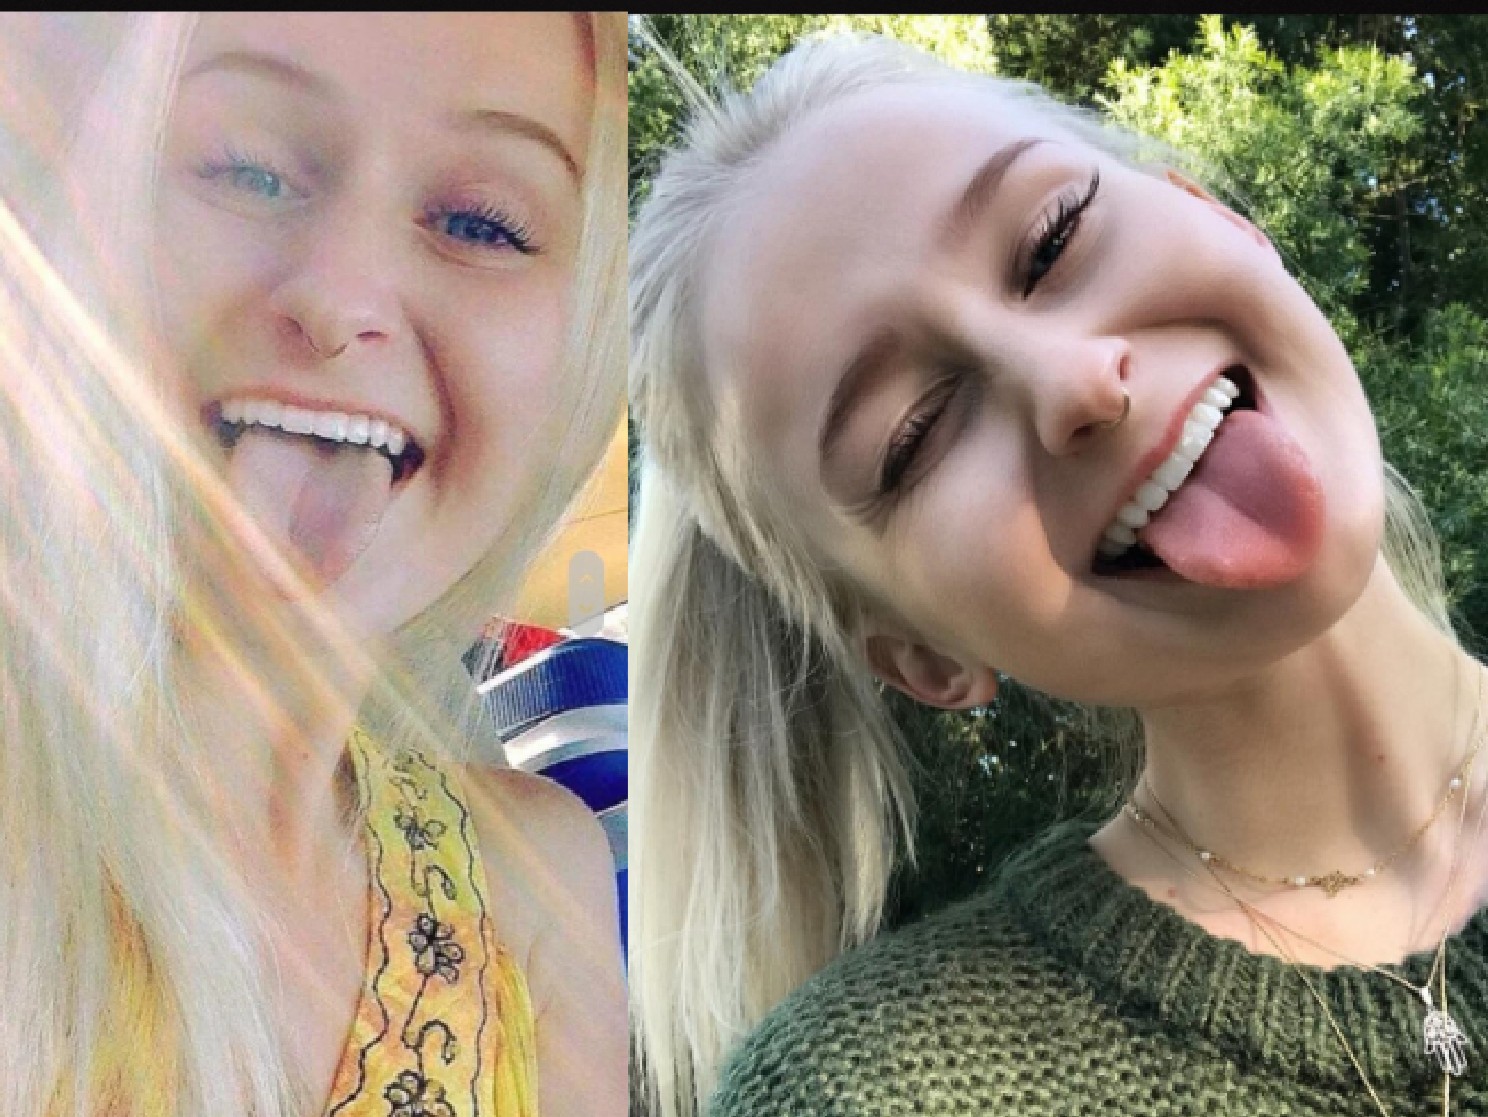 Cute Blonde Loves To Stick Out Her Cute Little Tongue Scrolller